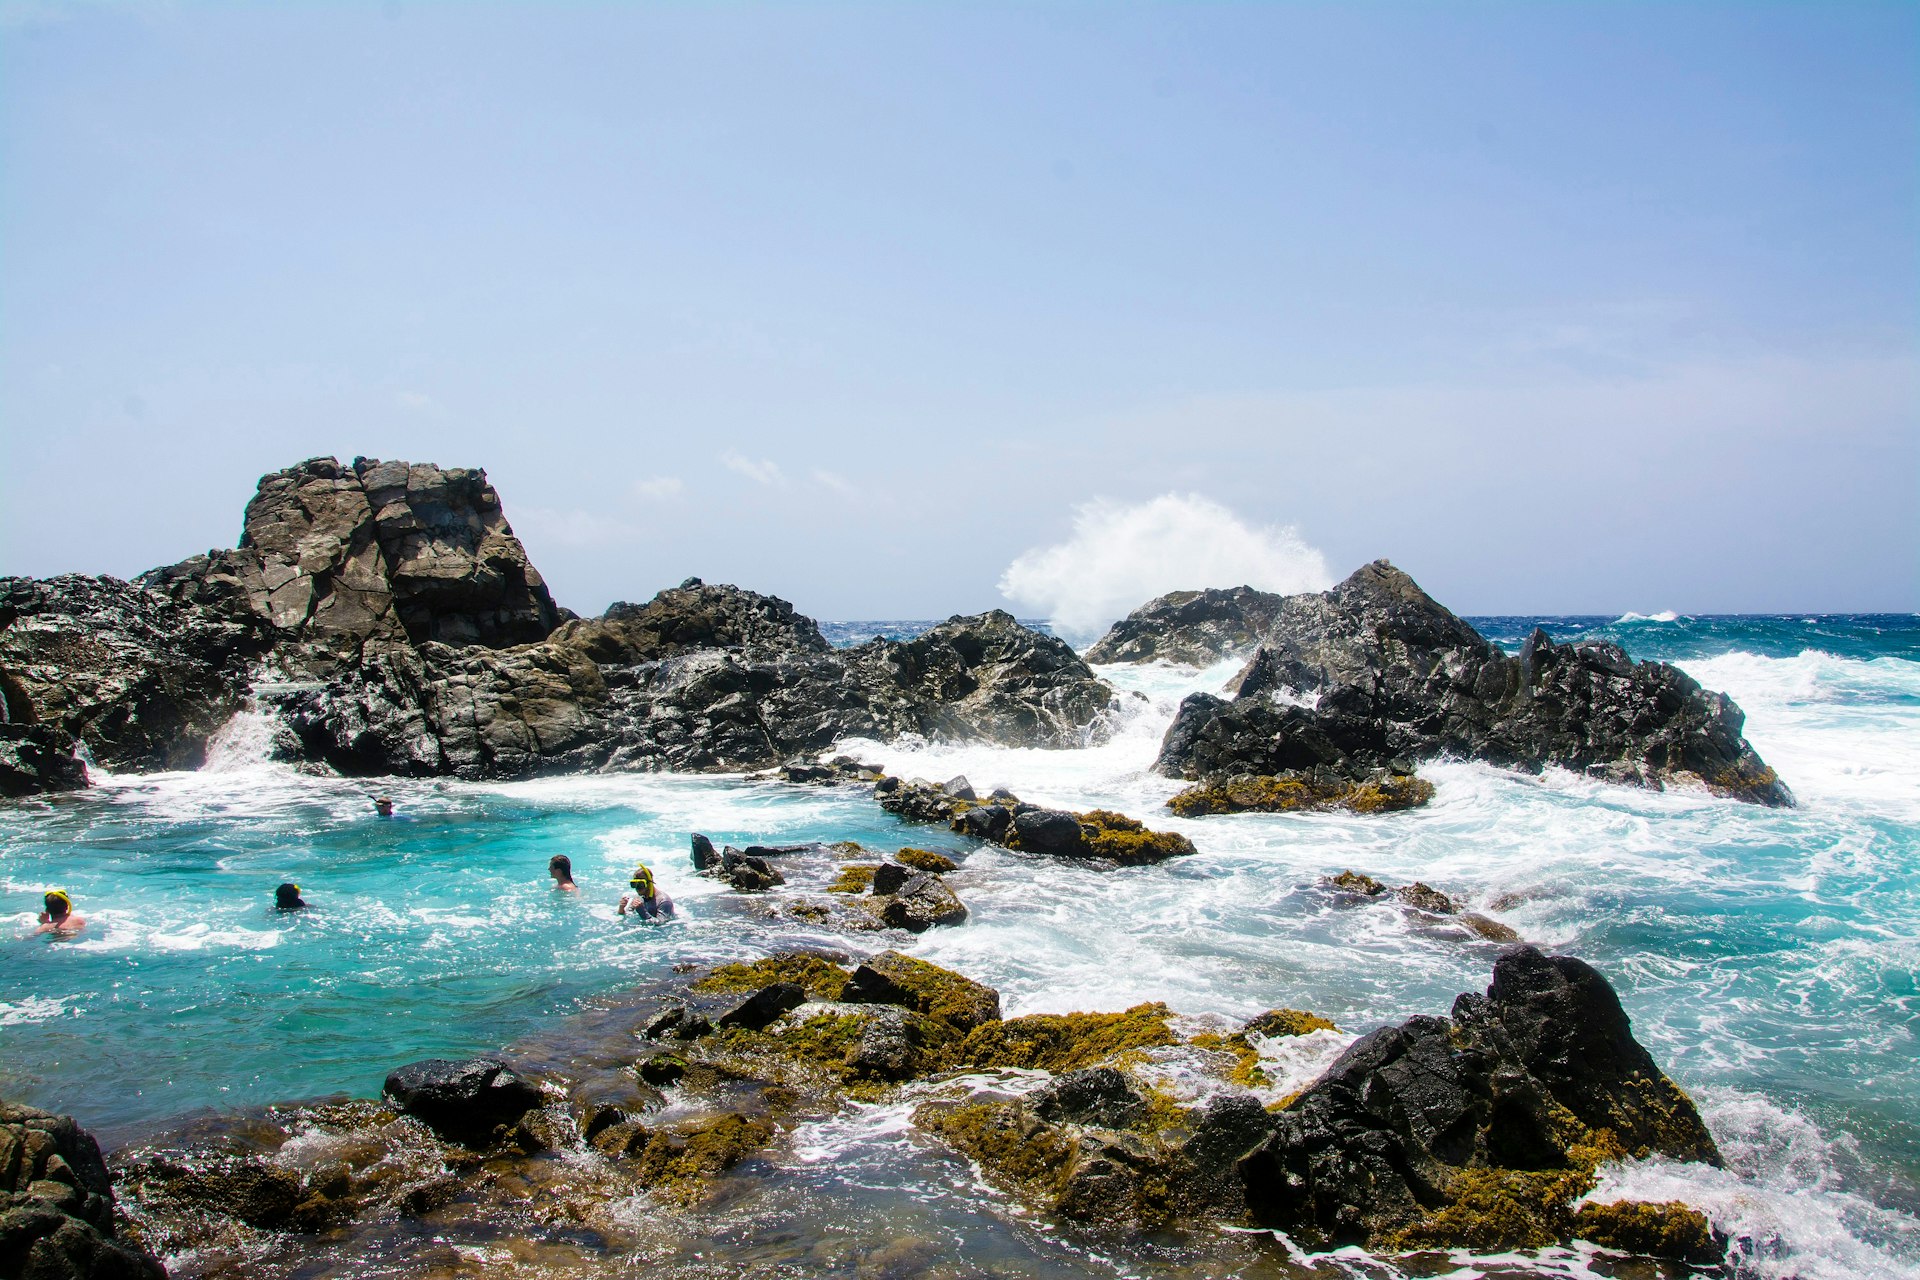 People swimming in a natural pool (conchi) by the ocean in Aruba